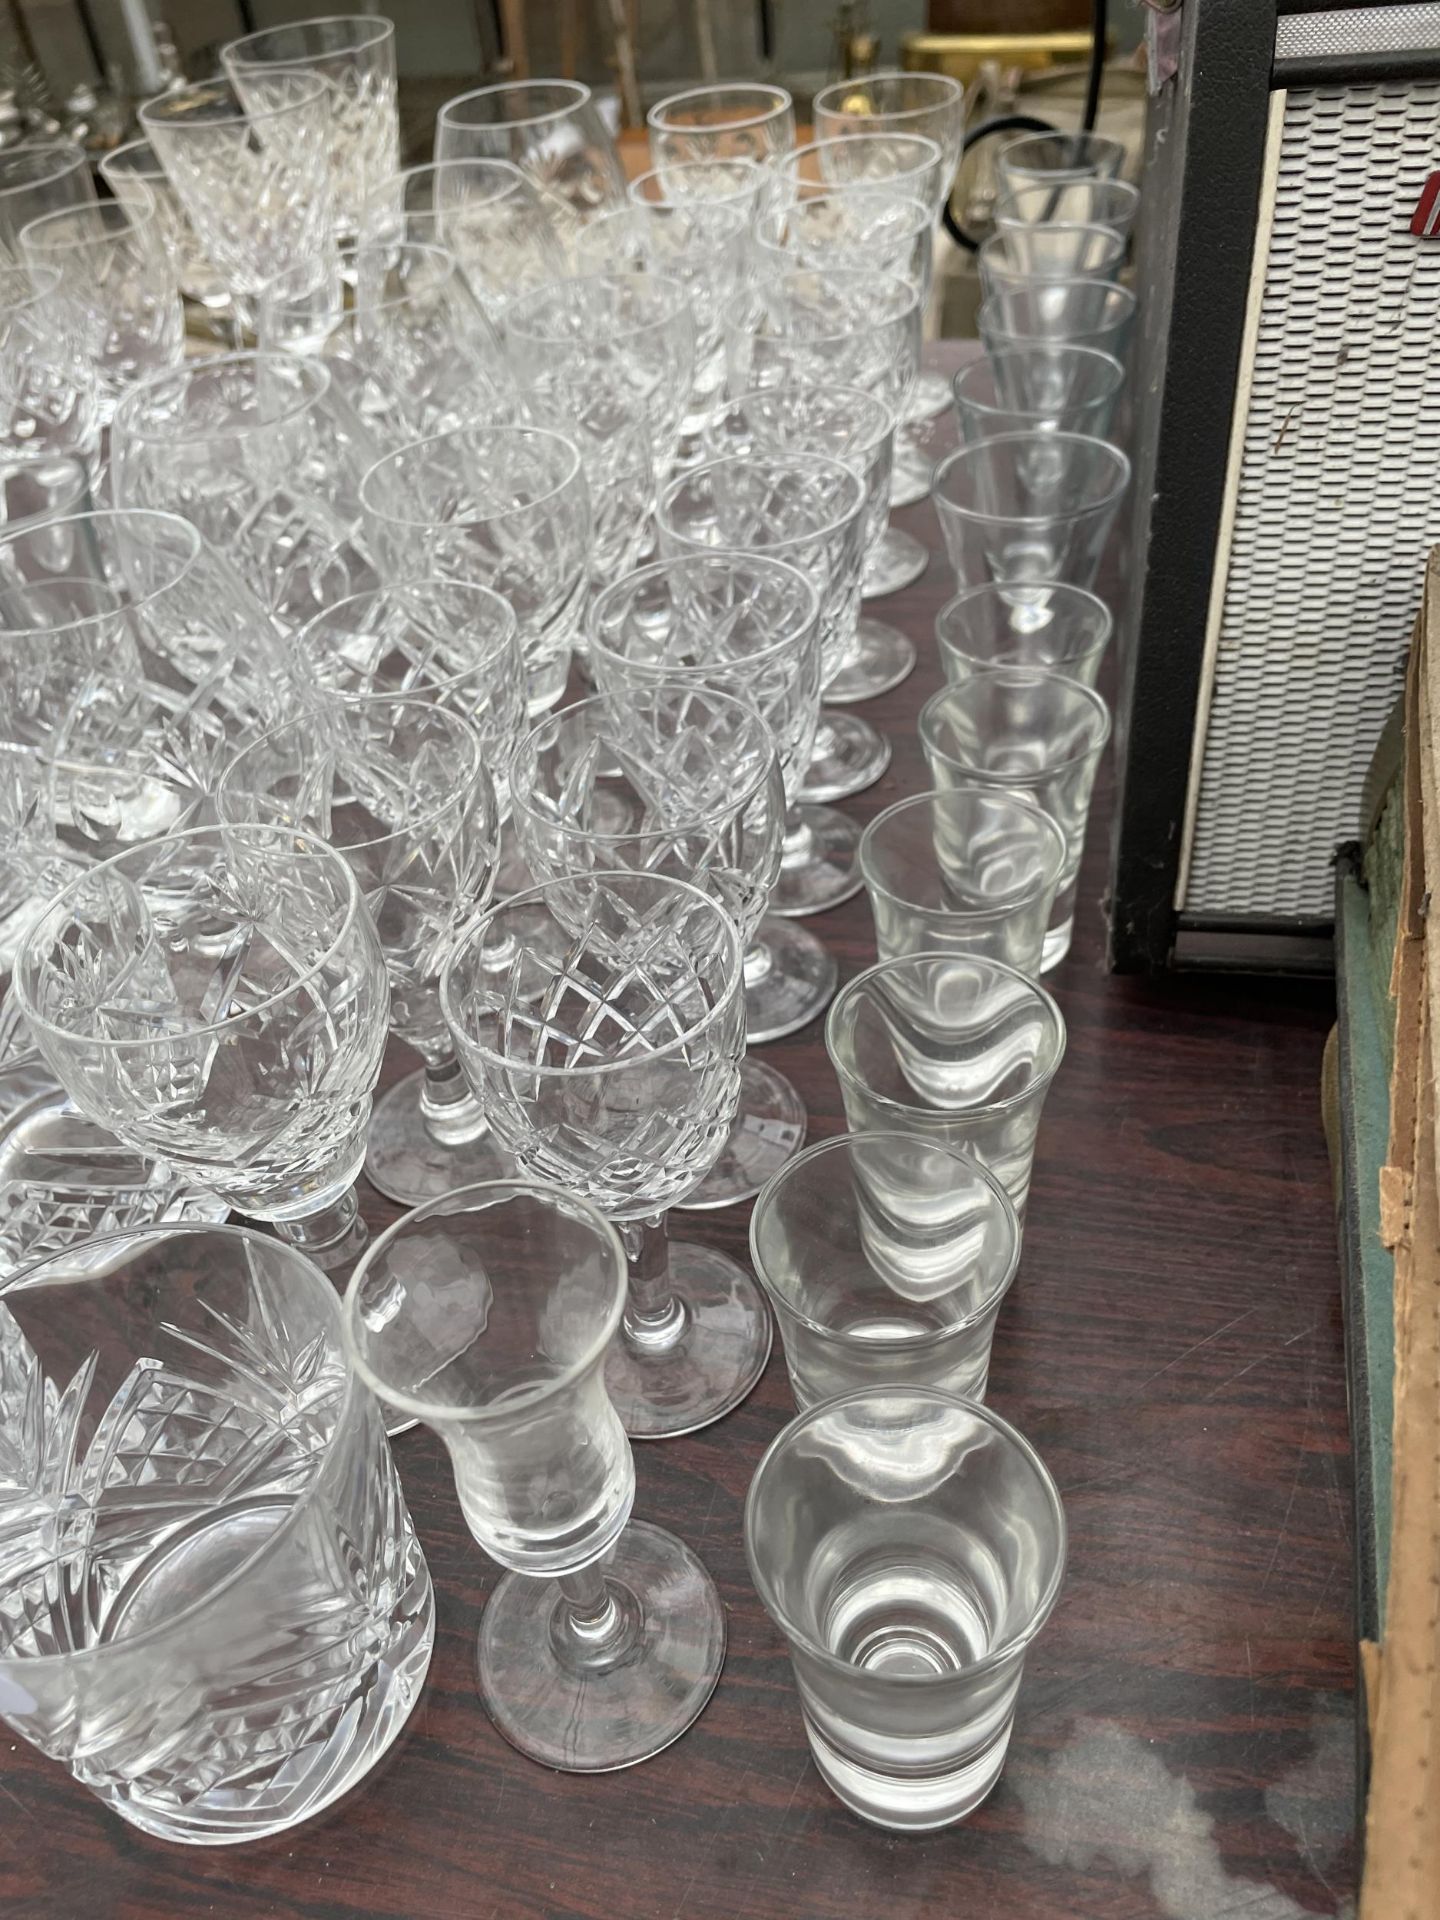 A LARGE QUANTITY OF CUT GLASS WARE TO INCLUDE SHERRY GLASSES, BRANDY BALLOONS AND WINE GLASSES ETC - Image 3 of 3